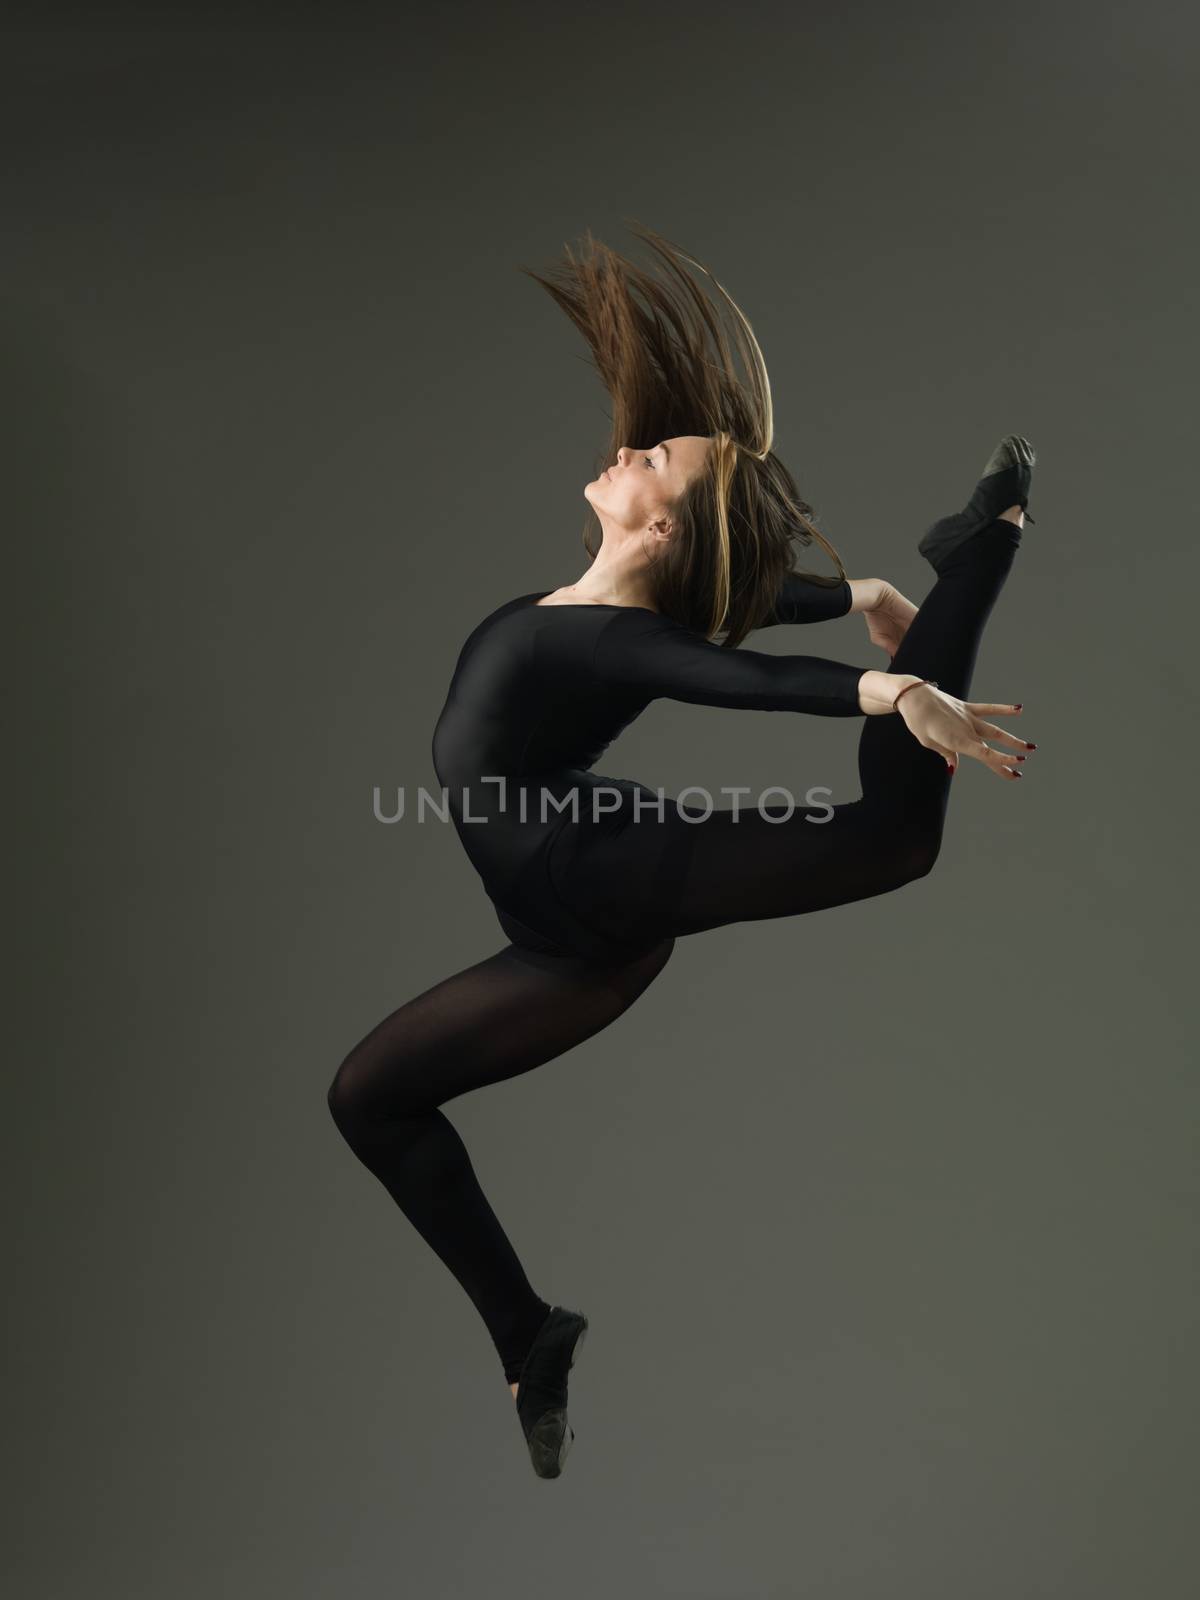 beautiful woman performing dance moves against grey background